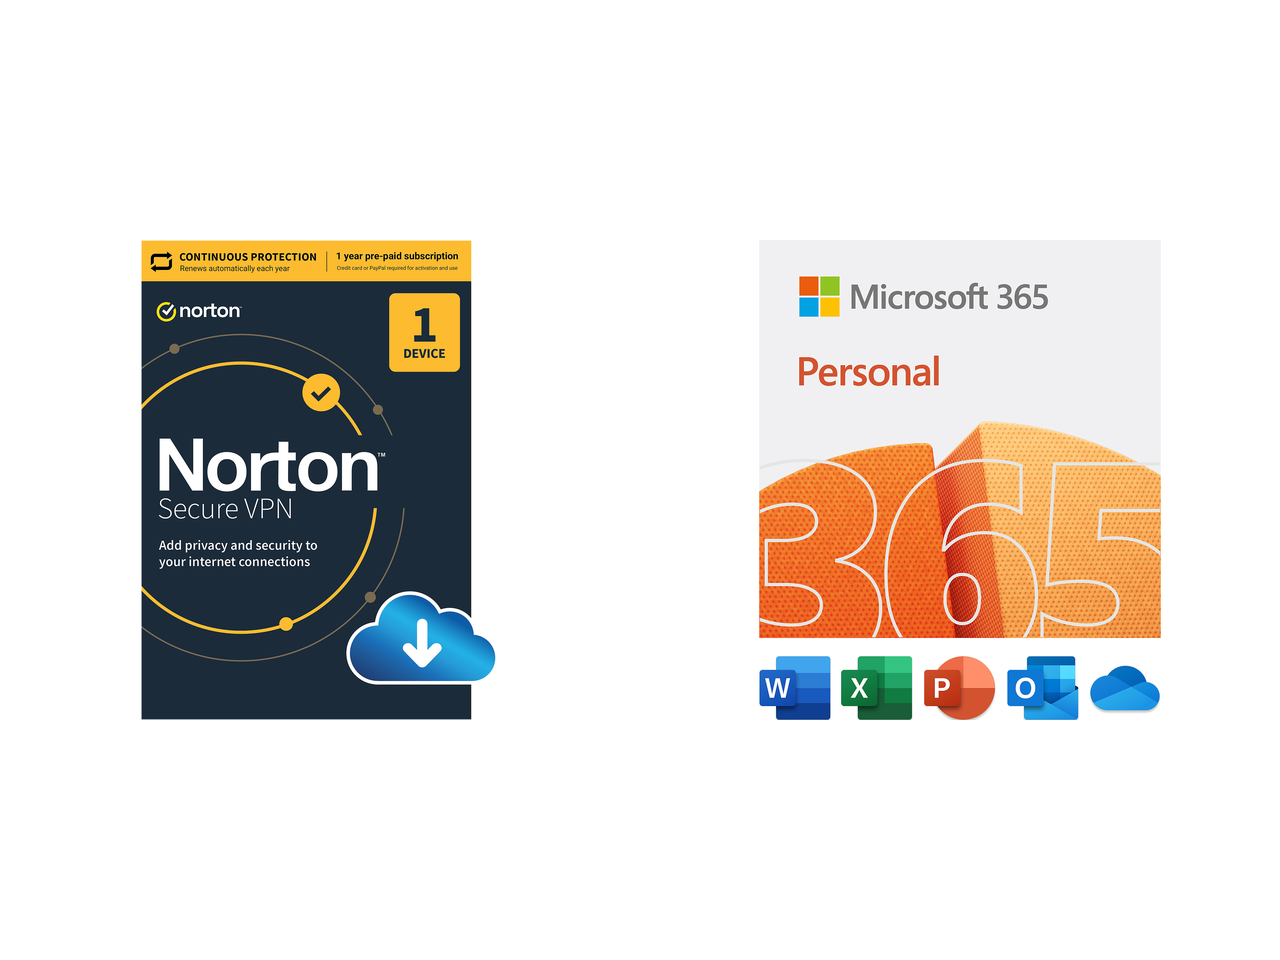 Microsoft 365 Office deals starting at $